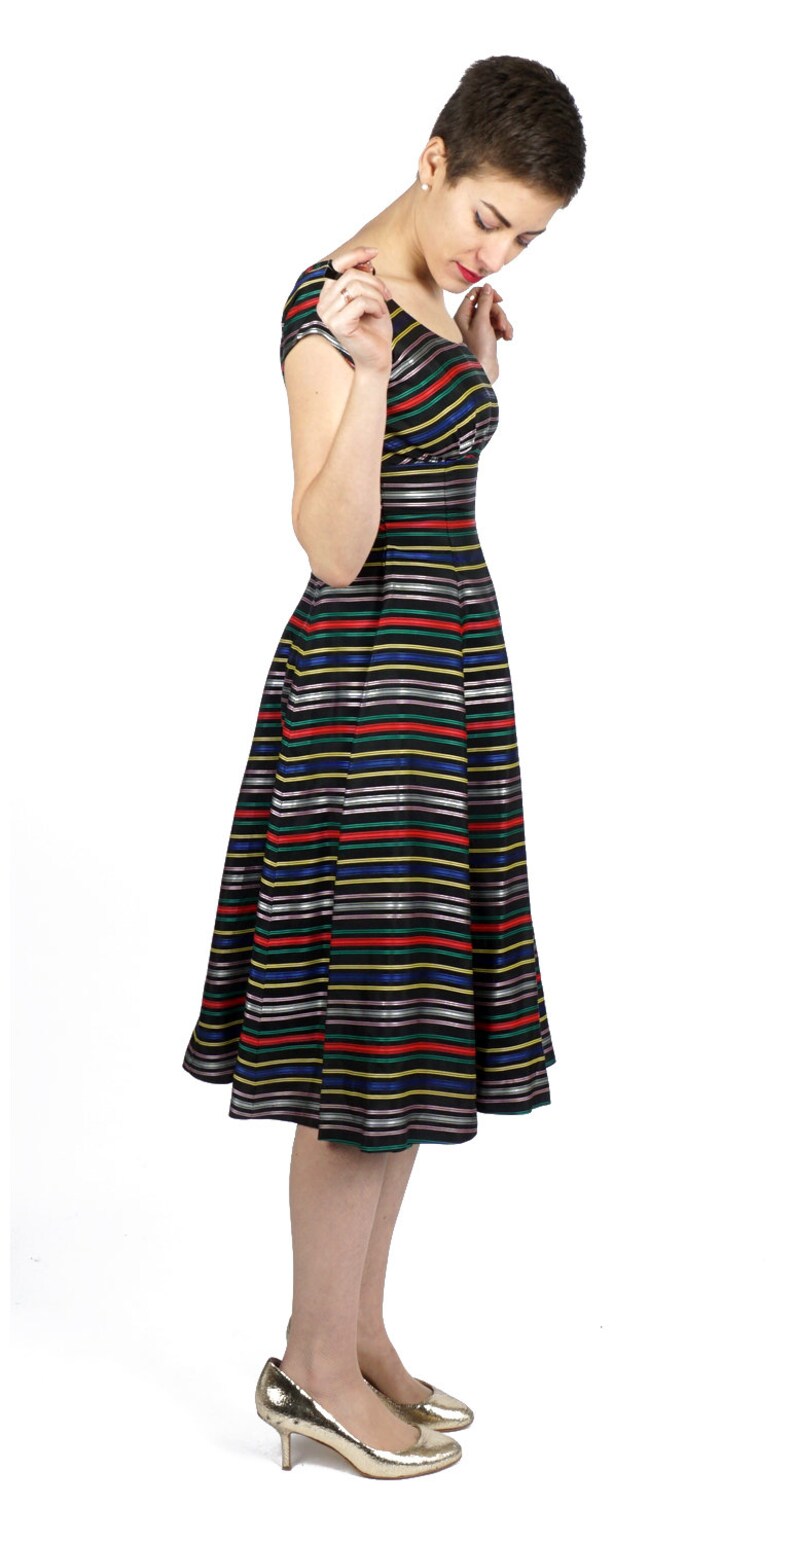 Vintage 1950s Black Stripe Fit & Flare Rainbow Ribbon Taffeta Party Dress with Fitted Waist and Full Skirt XS/Small image 7